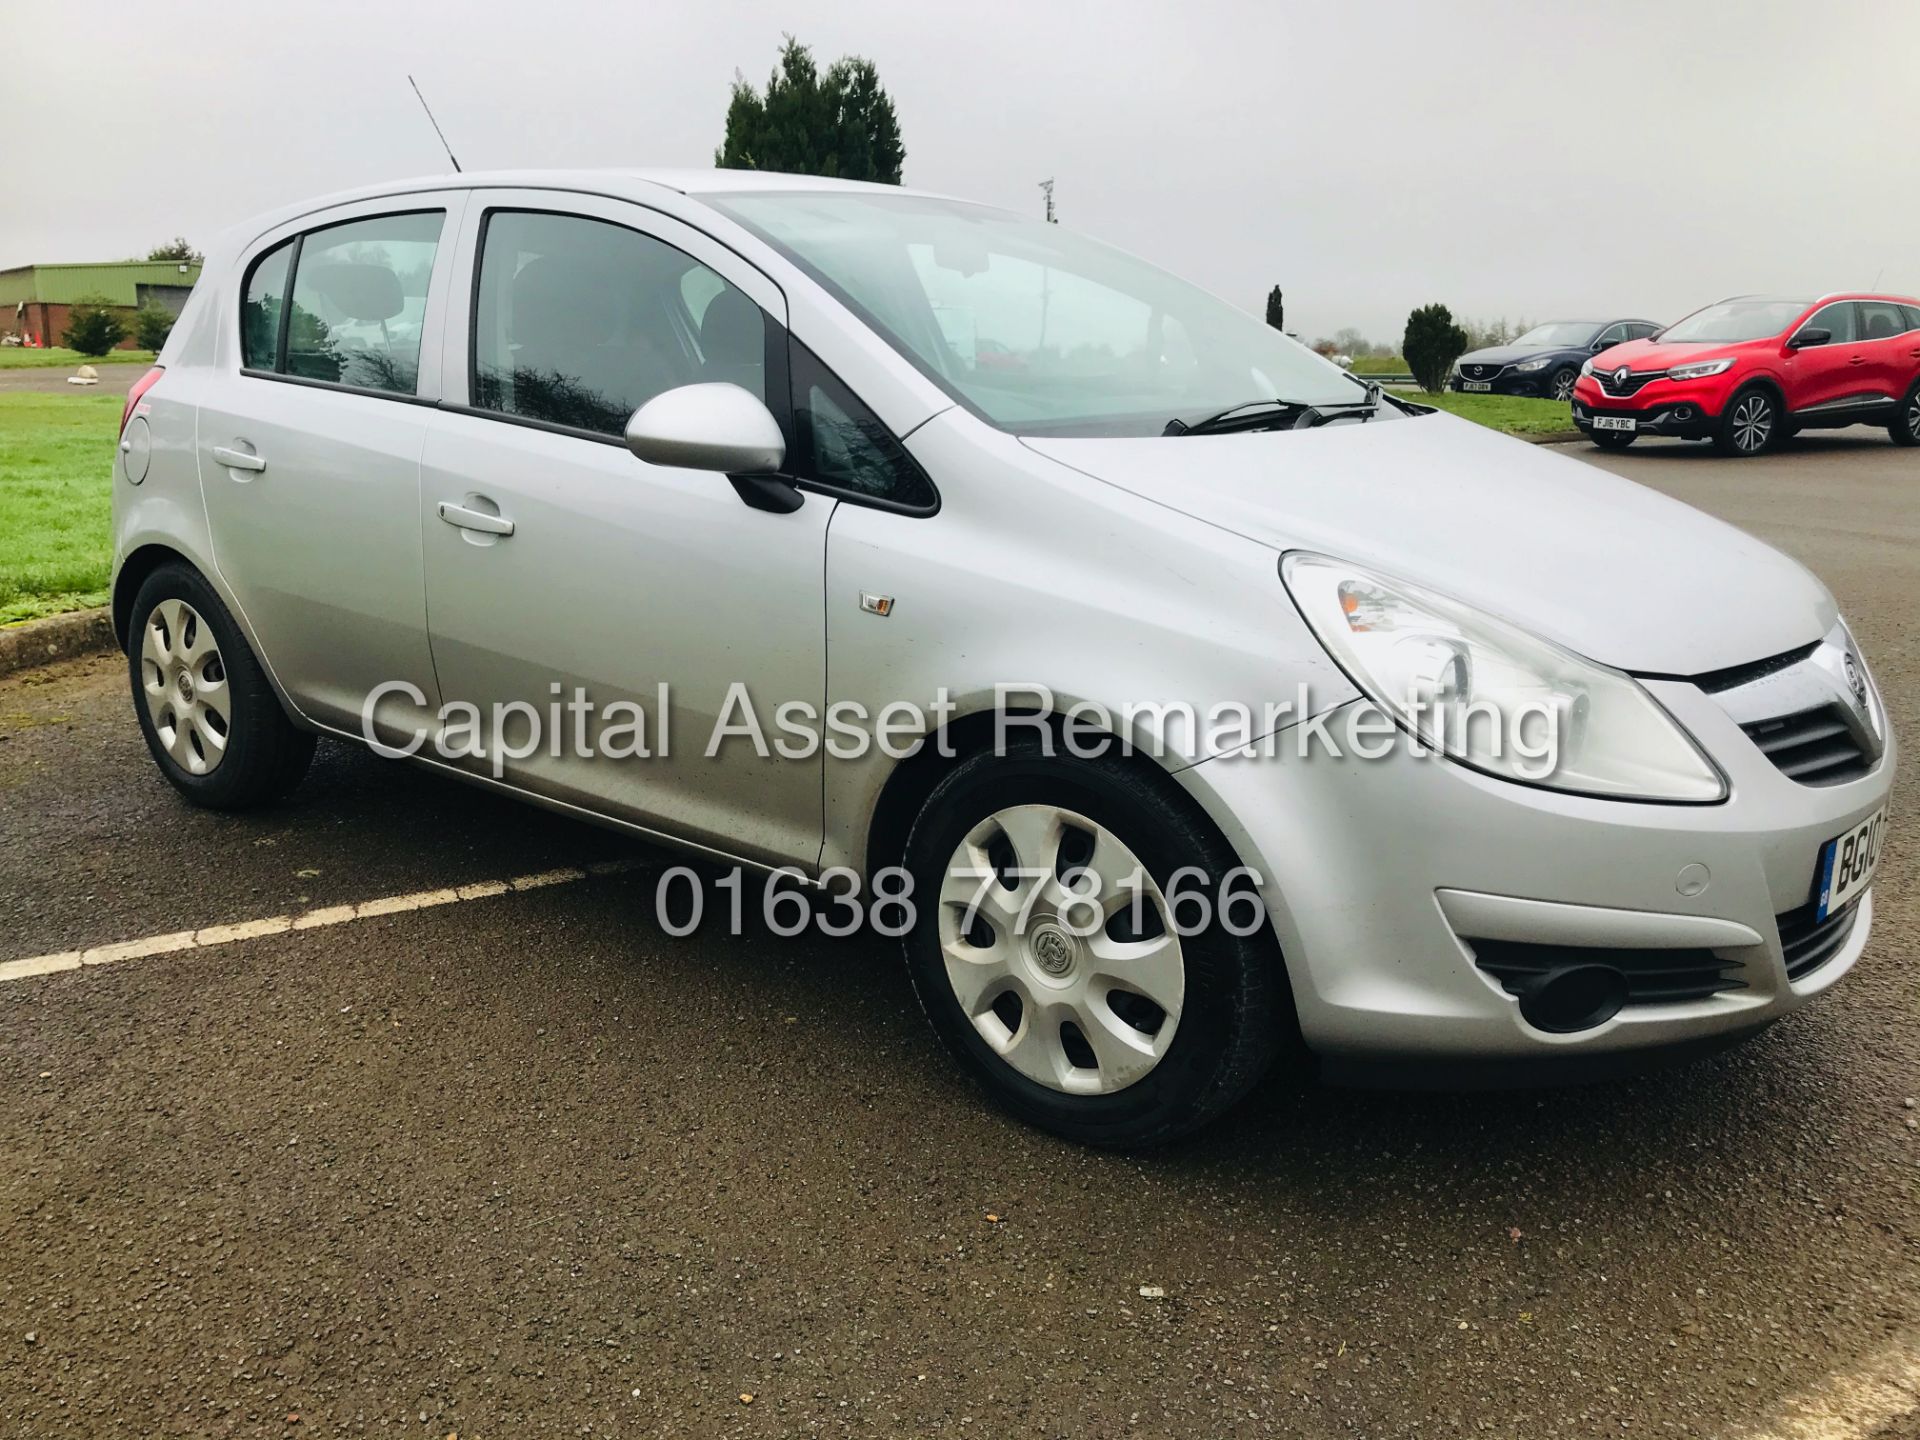 VAUXHALL CORSA 1.3CDTI ECOFLEX "EXCLUSIVE" 5 DOOR (10 REG) 1 COUNCIL OWNER FROM NEW (NO VAT TO PAY) - Image 3 of 16